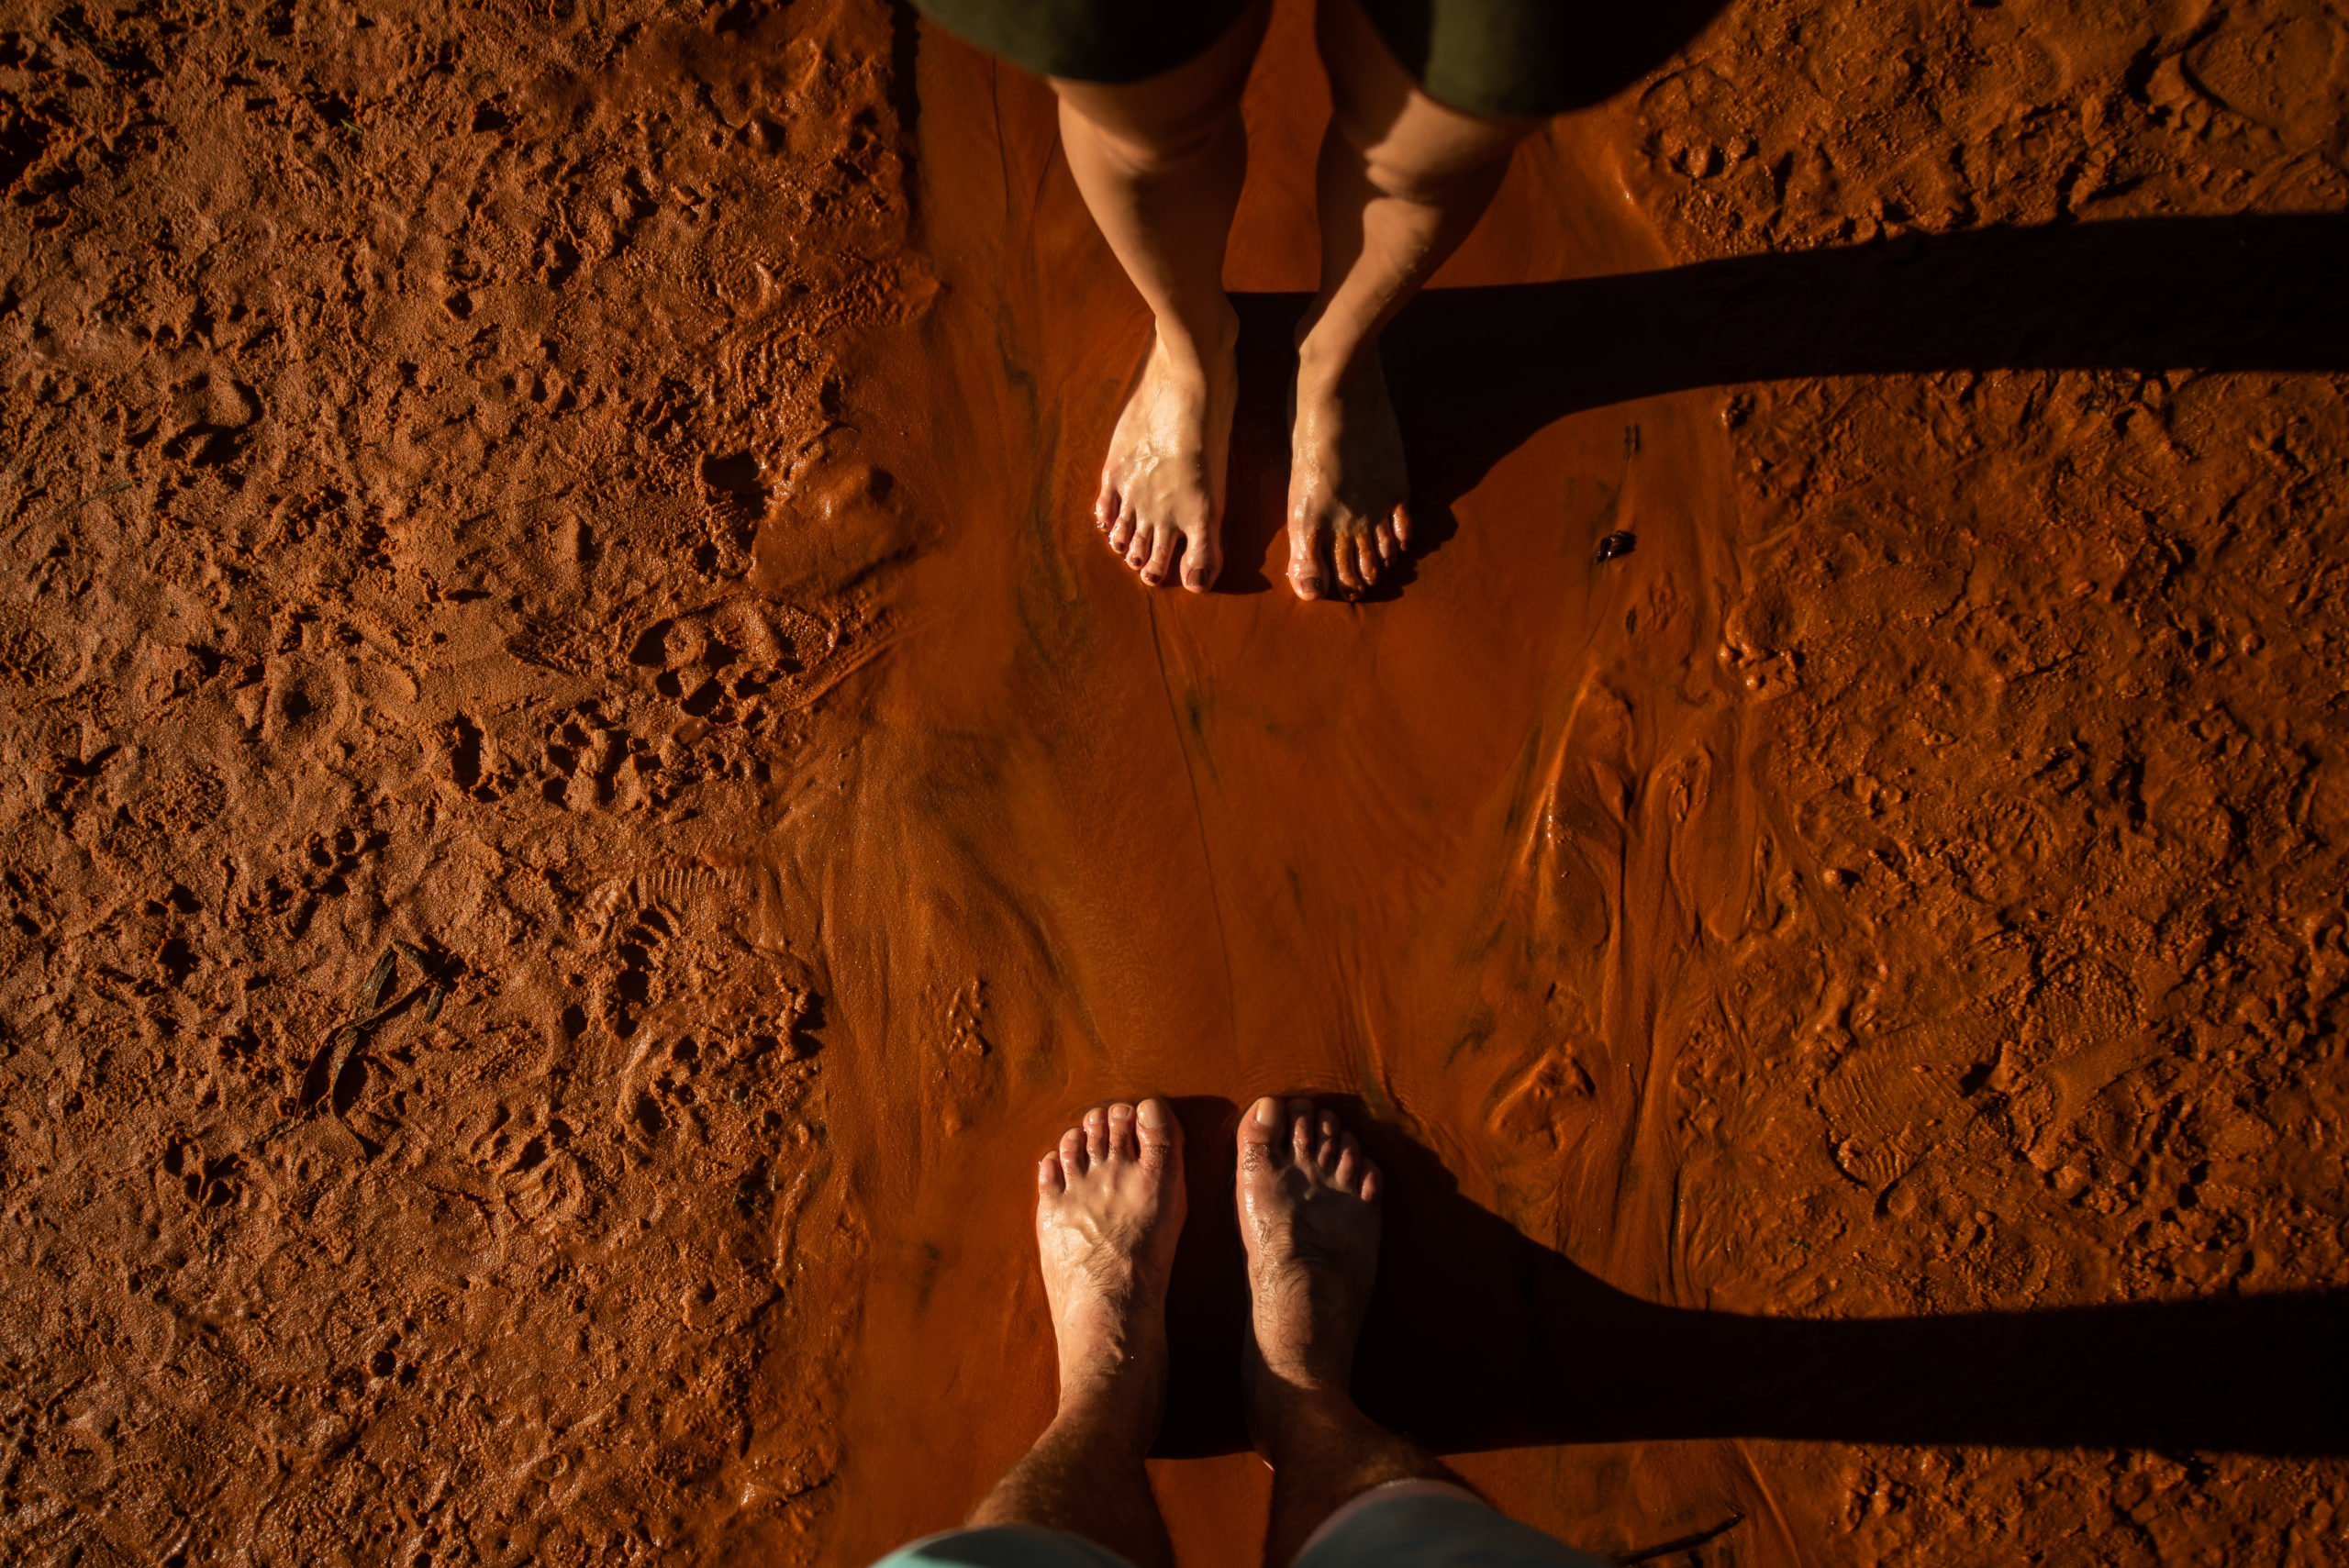 Feet on clay. Feet of a man and a woman on red clay, Vietnam